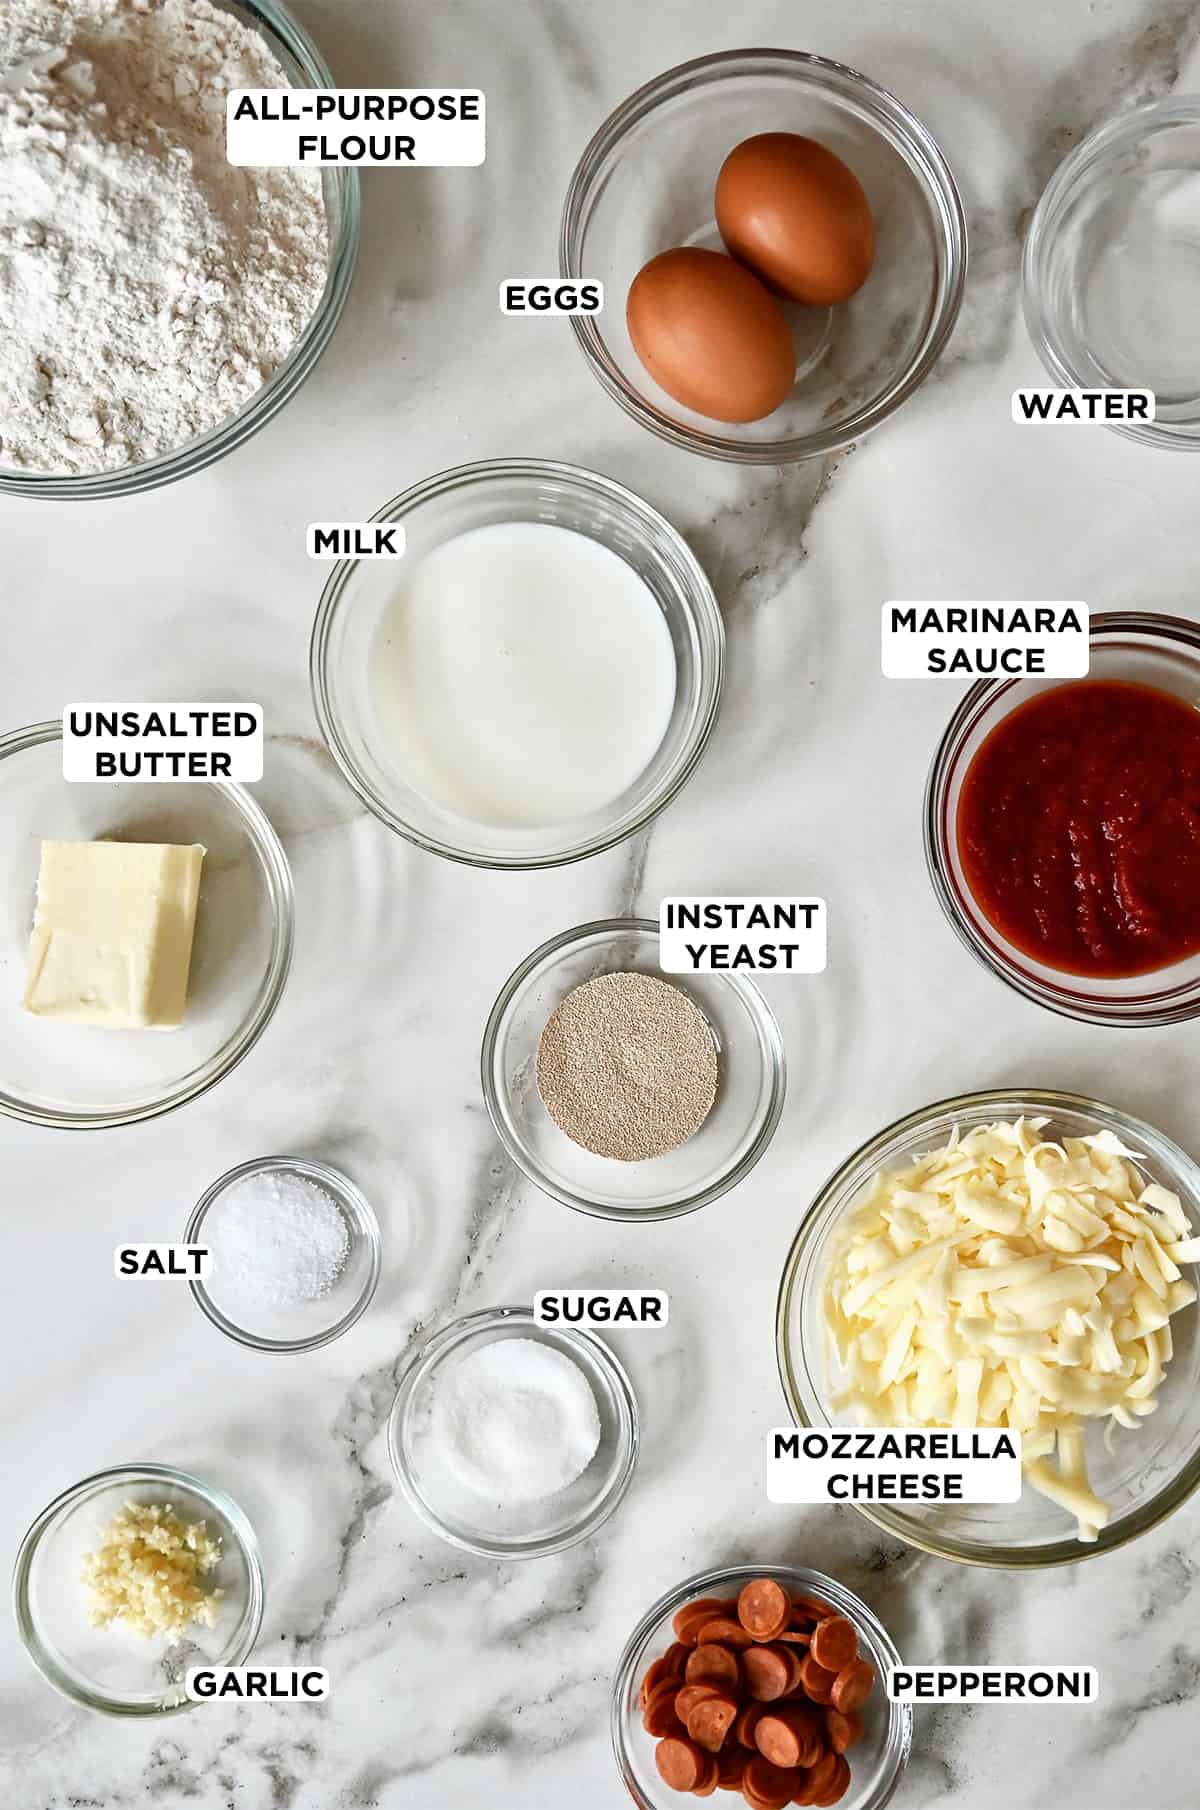 Various sizes of clear bowls containing flour, eggs, milk, marinara sauce, instant yeast, shredded mozzarella cheese, salt, sugar, butter and mini pepperoni.